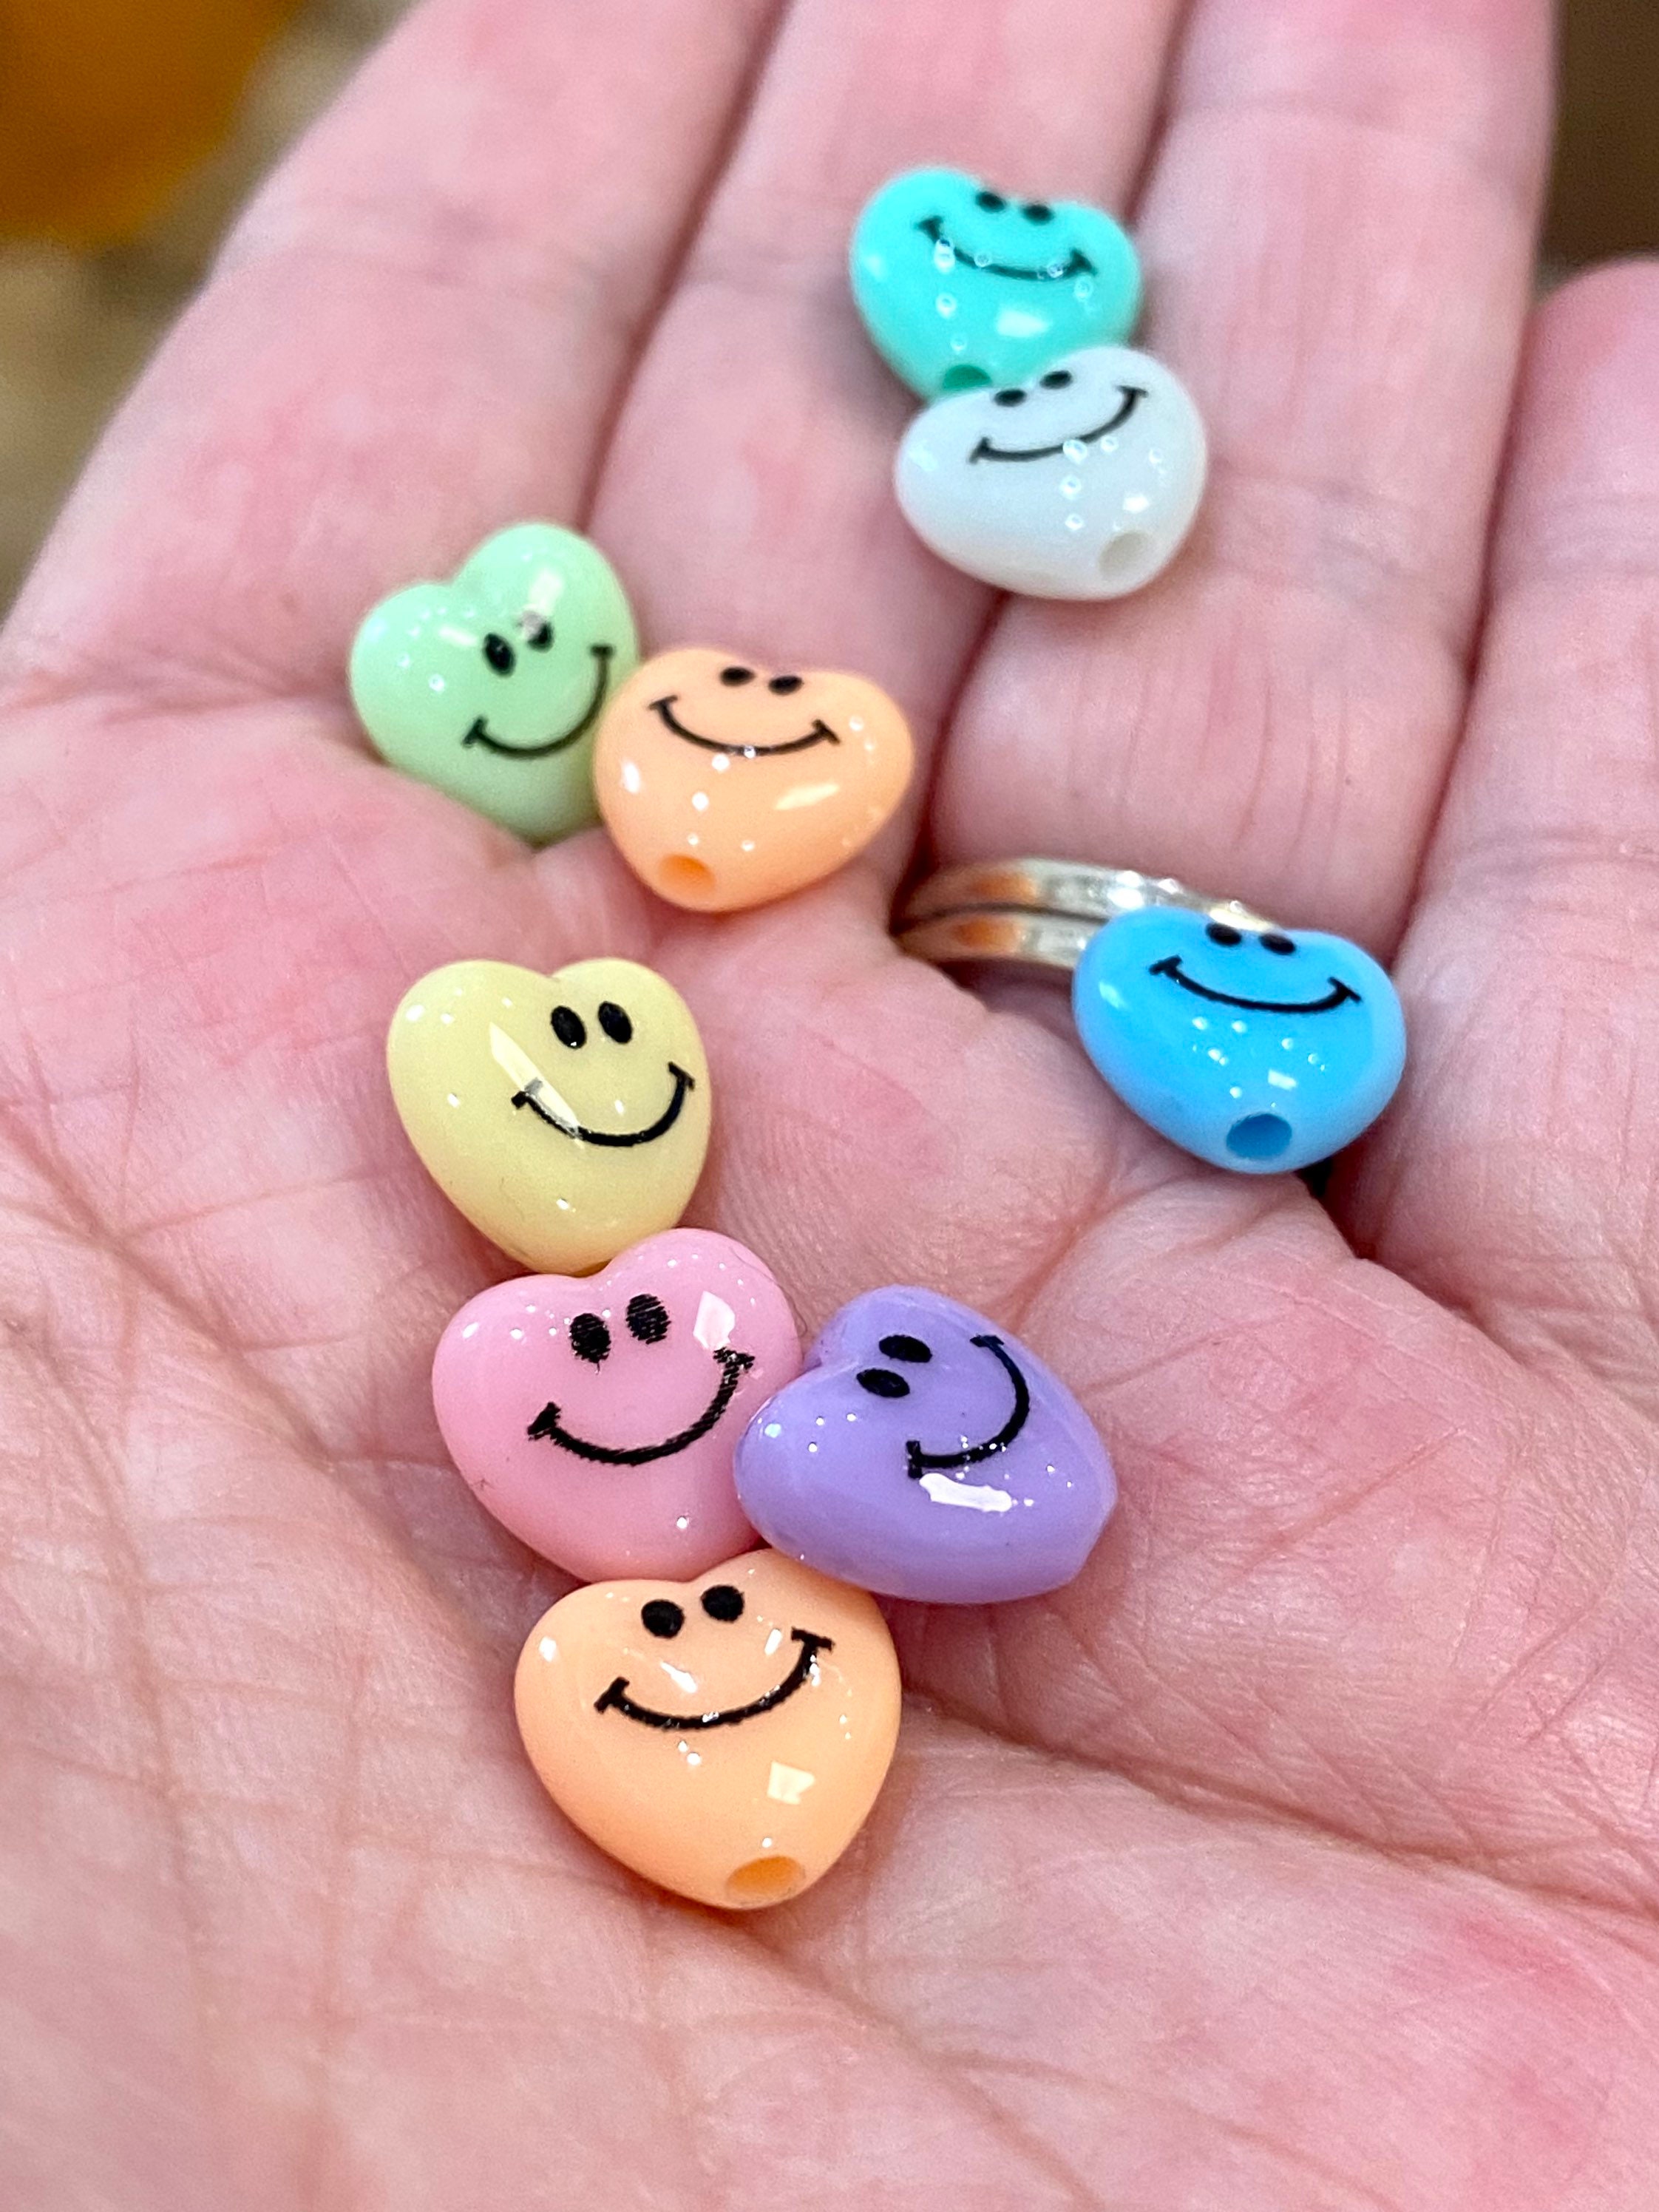 300Pcs Smiley Face Beads - 10mm Happy Face Acrylic Smiley Face Beads,  Handmade Smiley Beads, Polymer Clay Beads for DIY Bracelets, Necklaces,  Jewelry